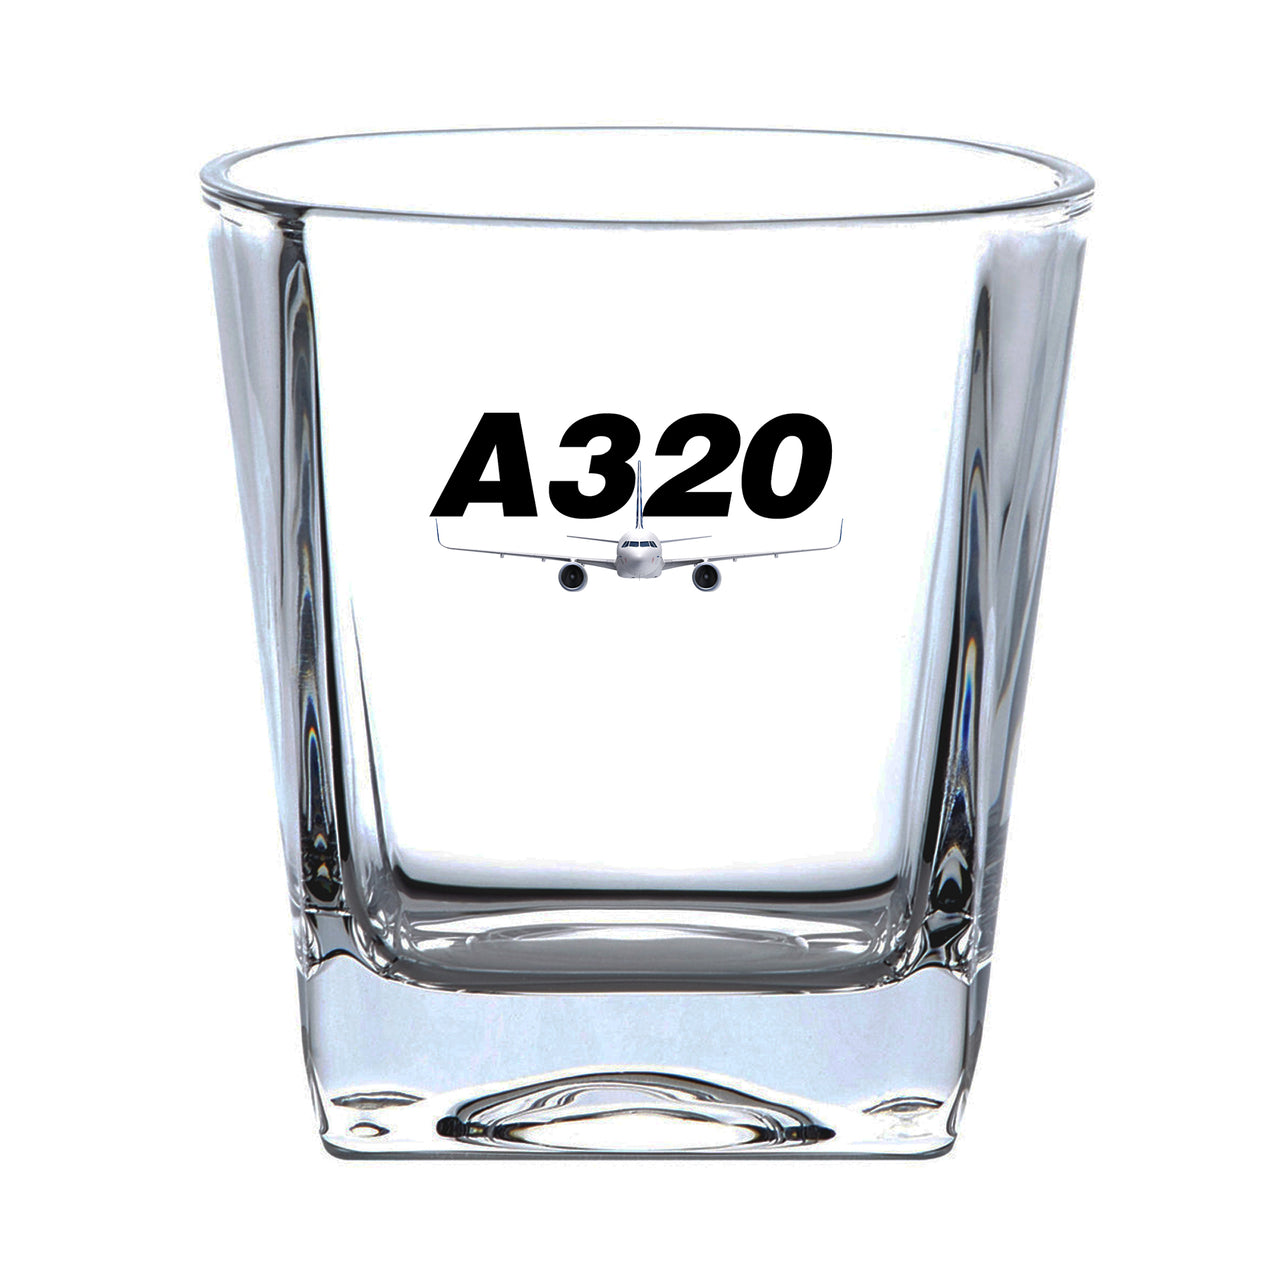 Super Airbus A320 Designed Whiskey Glass